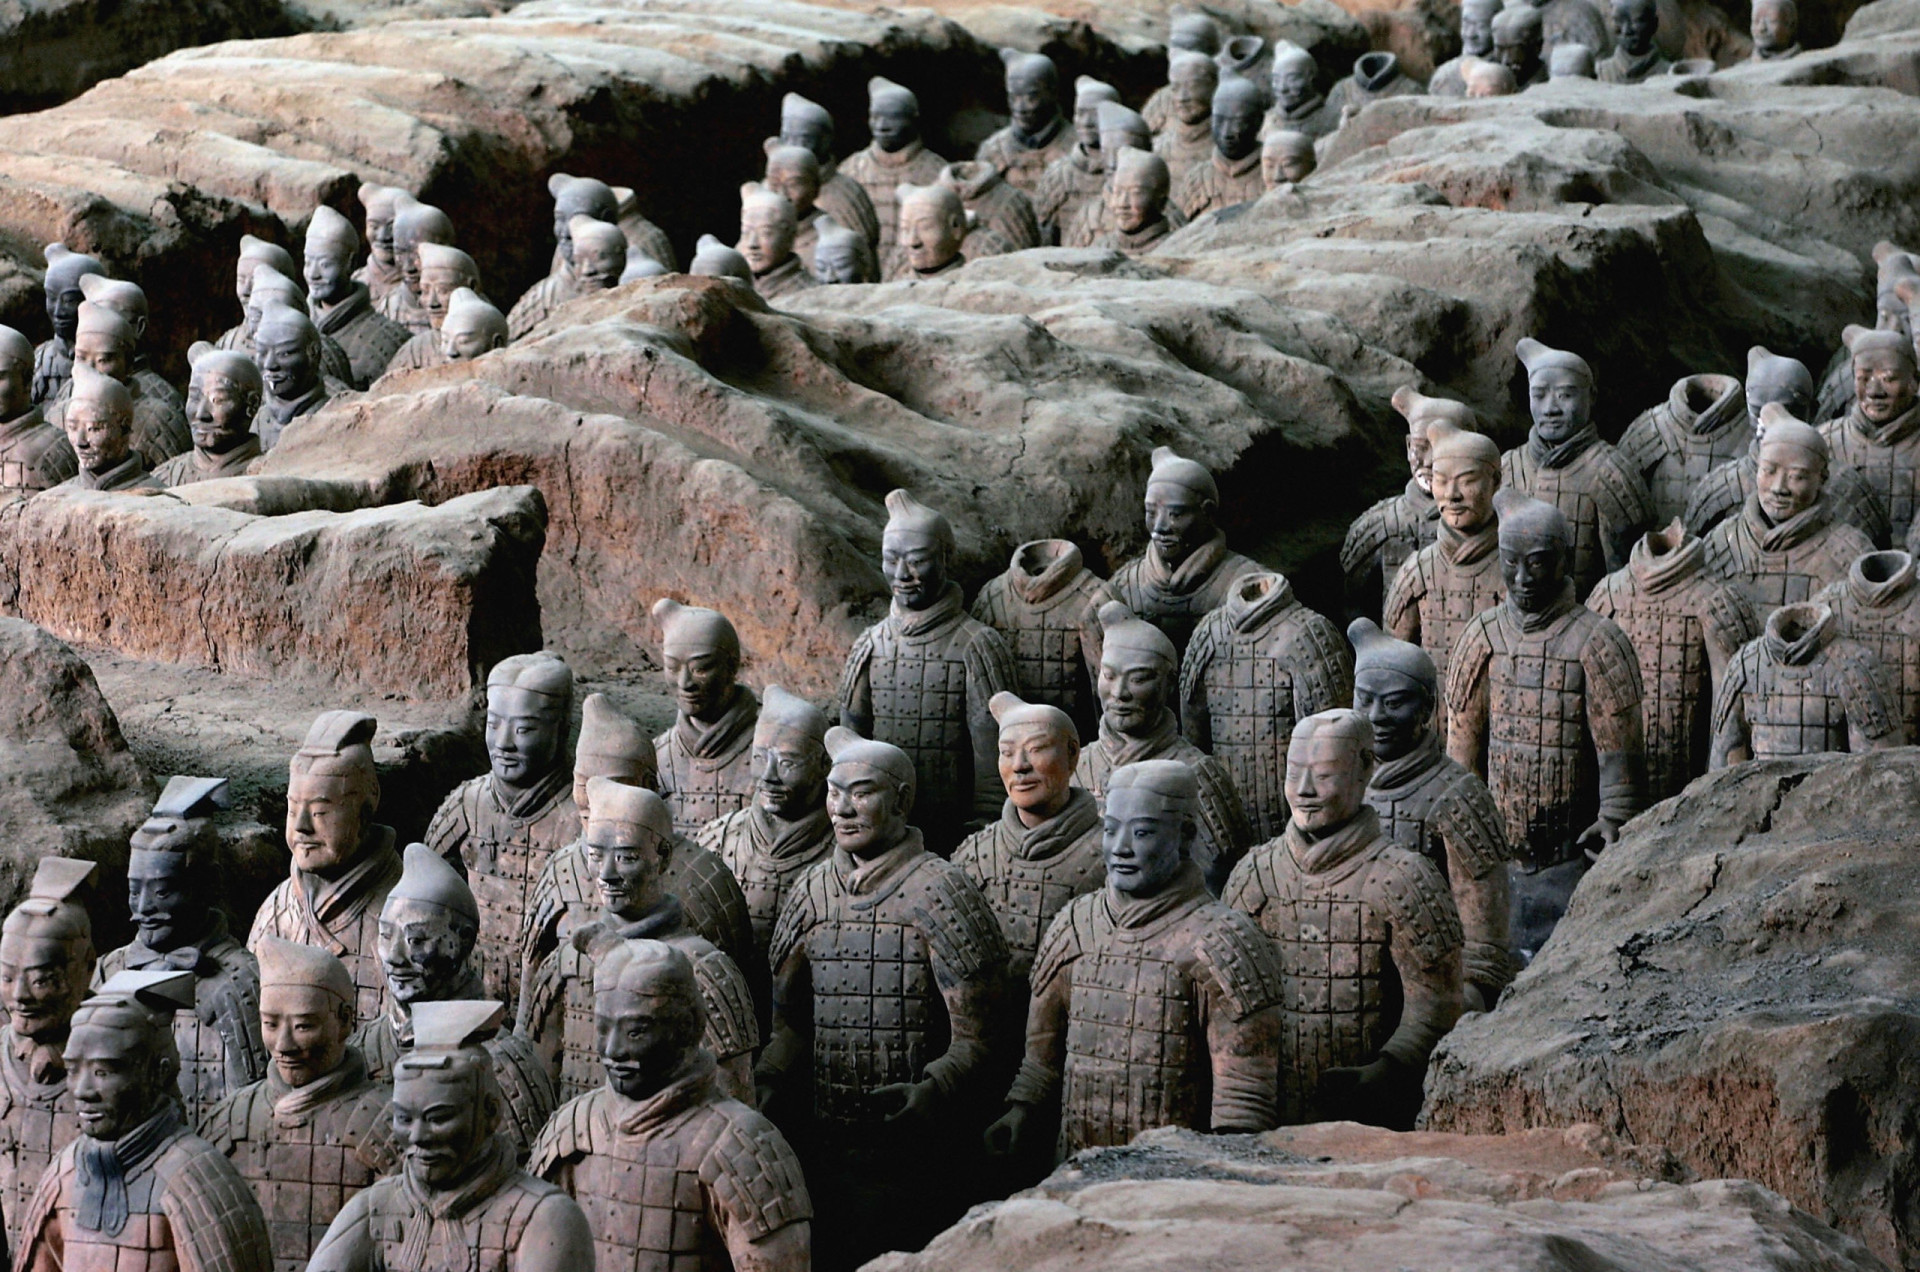 <p>If you find yourself visiting the Shaanxi province of China, you will assuredly be keen to lay eyes on the more than 8,000 soldiers of the Terracotta Army. This year marks the 50th anniversary since the soldiers were excavated.</p><p><a href="https://www.msn.com/en-us/community/channel/vid-7xx8mnucu55yw63we9va2gwr7uihbxwc68fxqp25x6tg4ftibpra?cvid=94631541bc0f4f89bfd59158d696ad7e">Follow us and access great exclusive content every day</a></p>